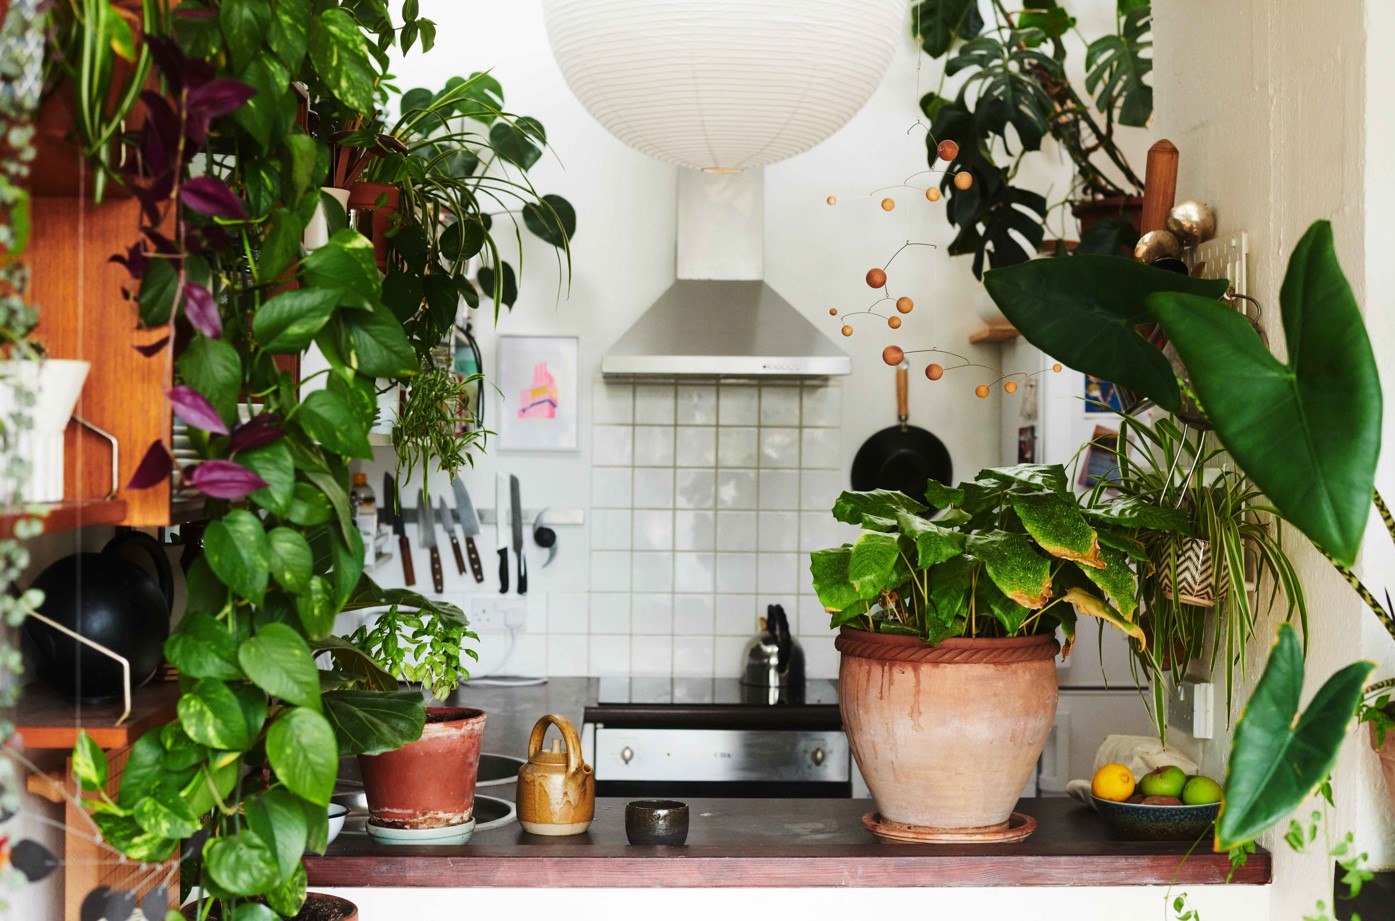 A kitchen filled with plants